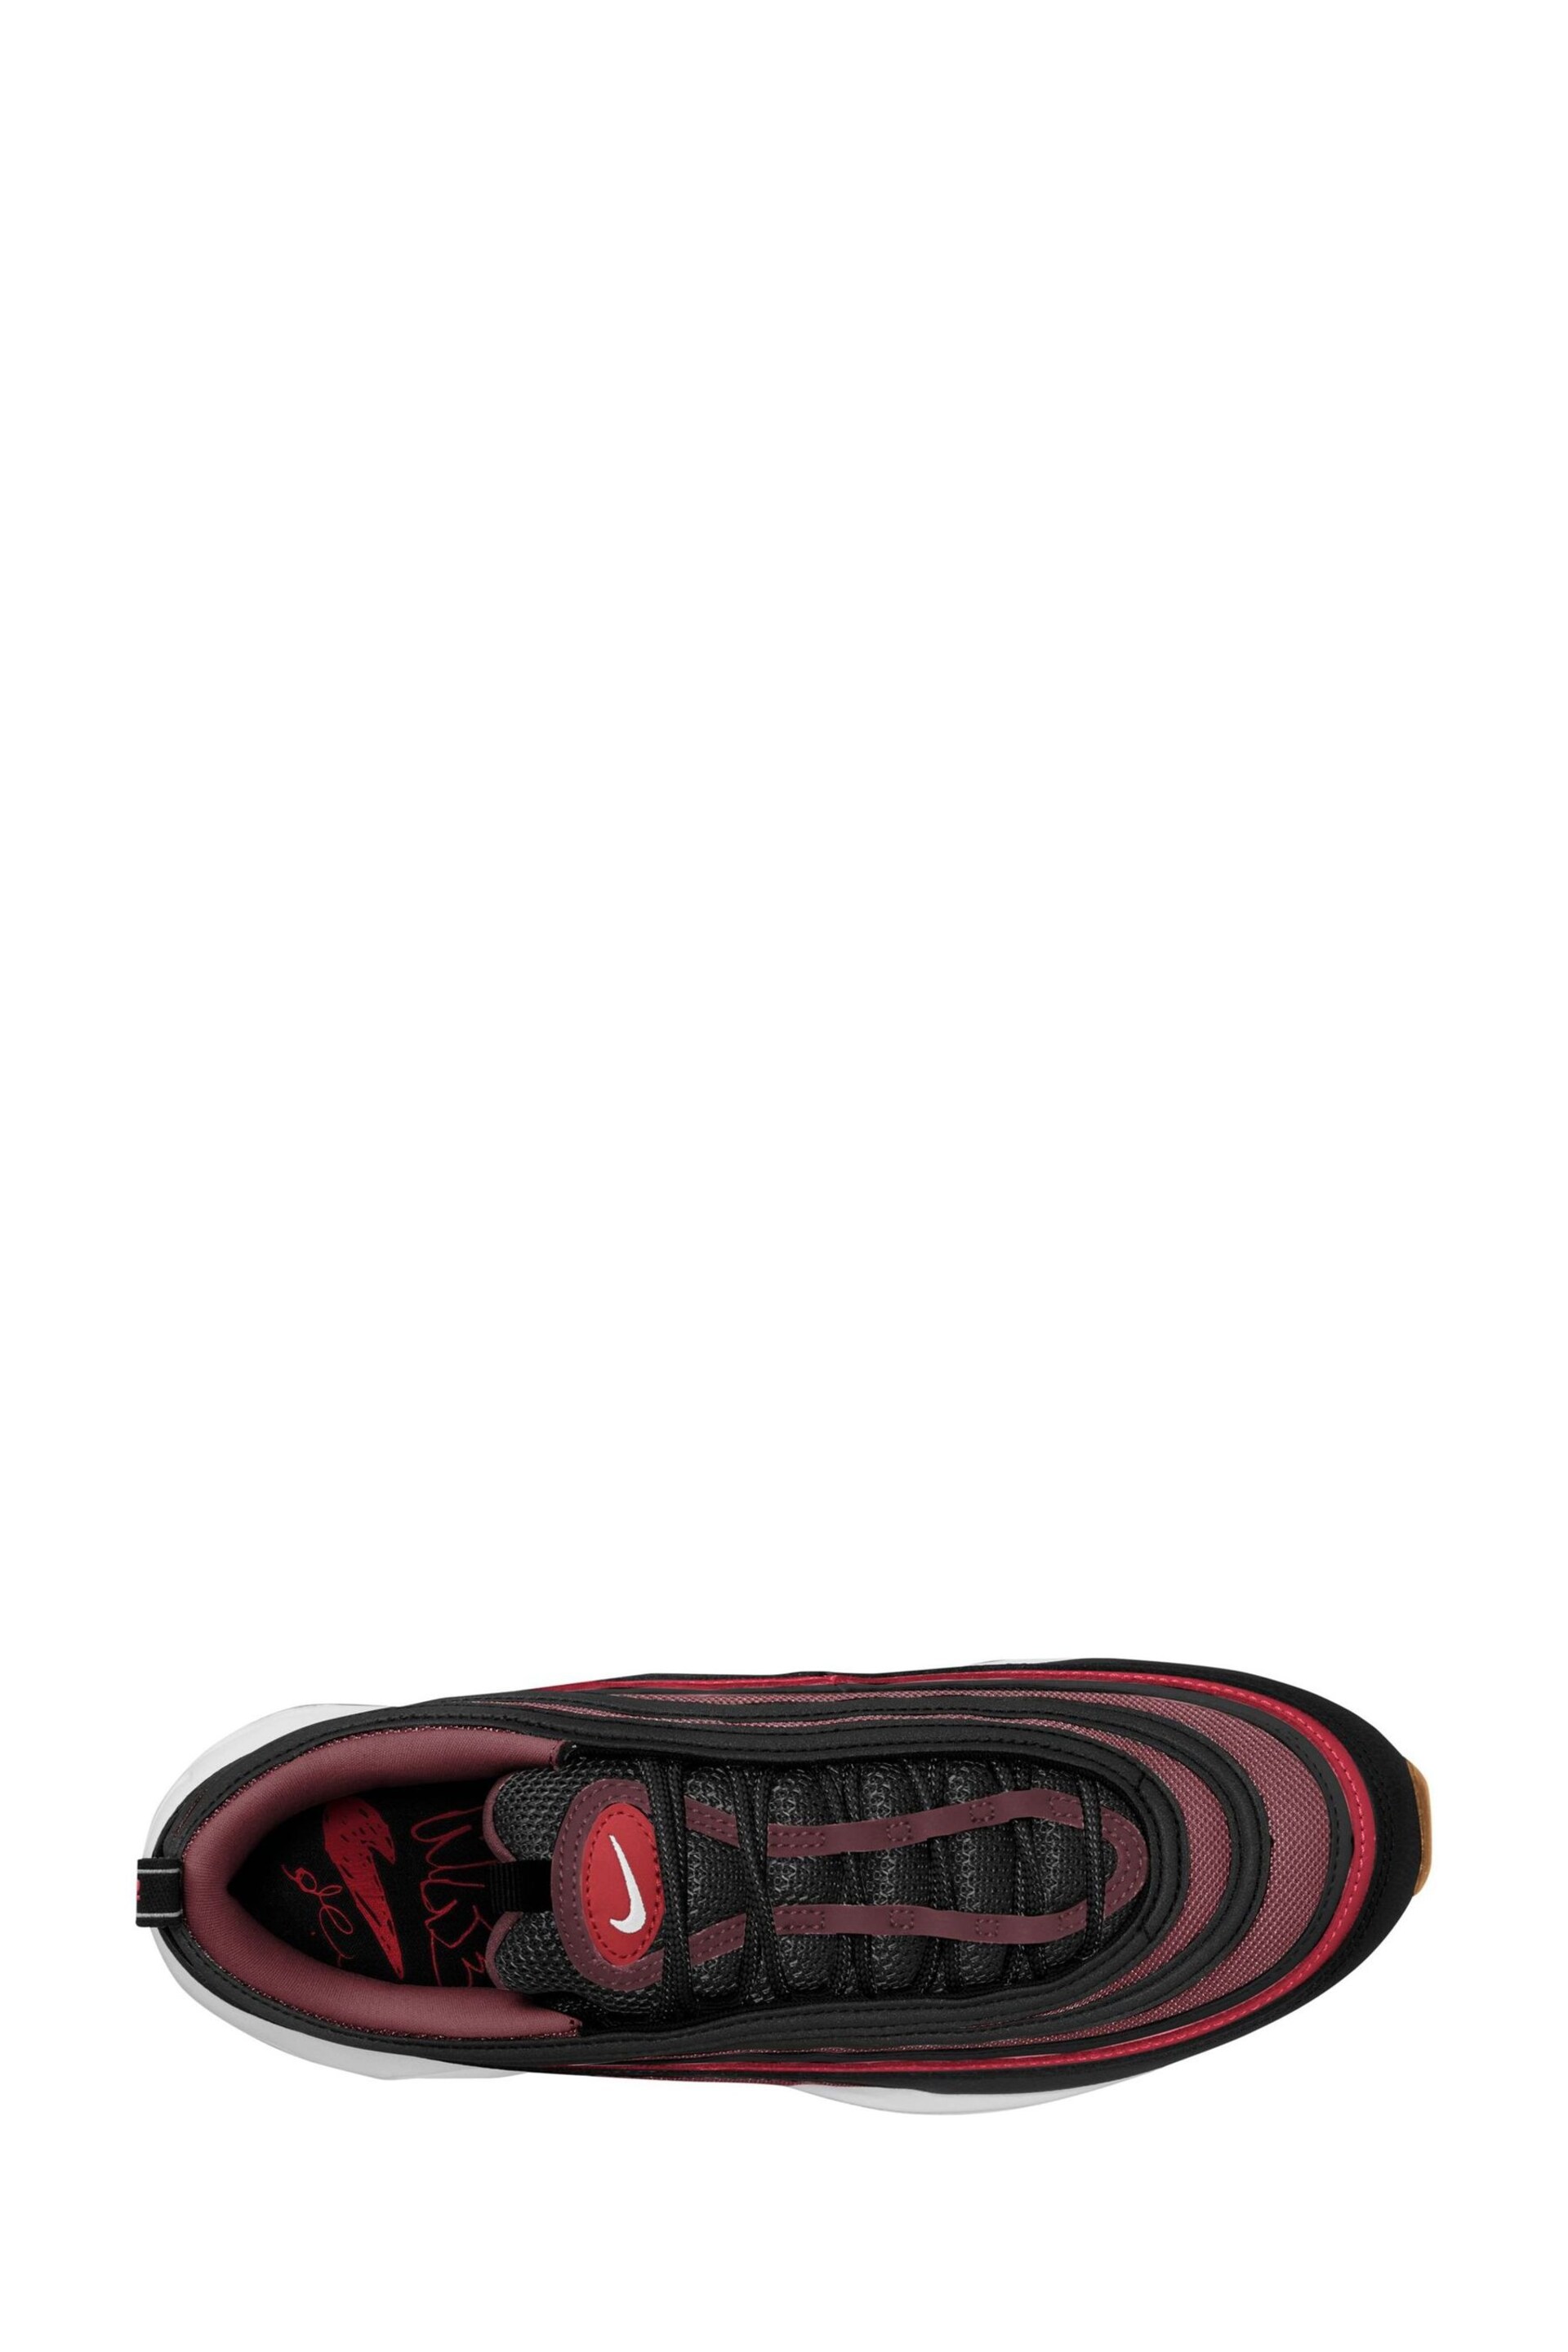 Nike Red/Black Air Max 97 Trainers - Image 8 of 11